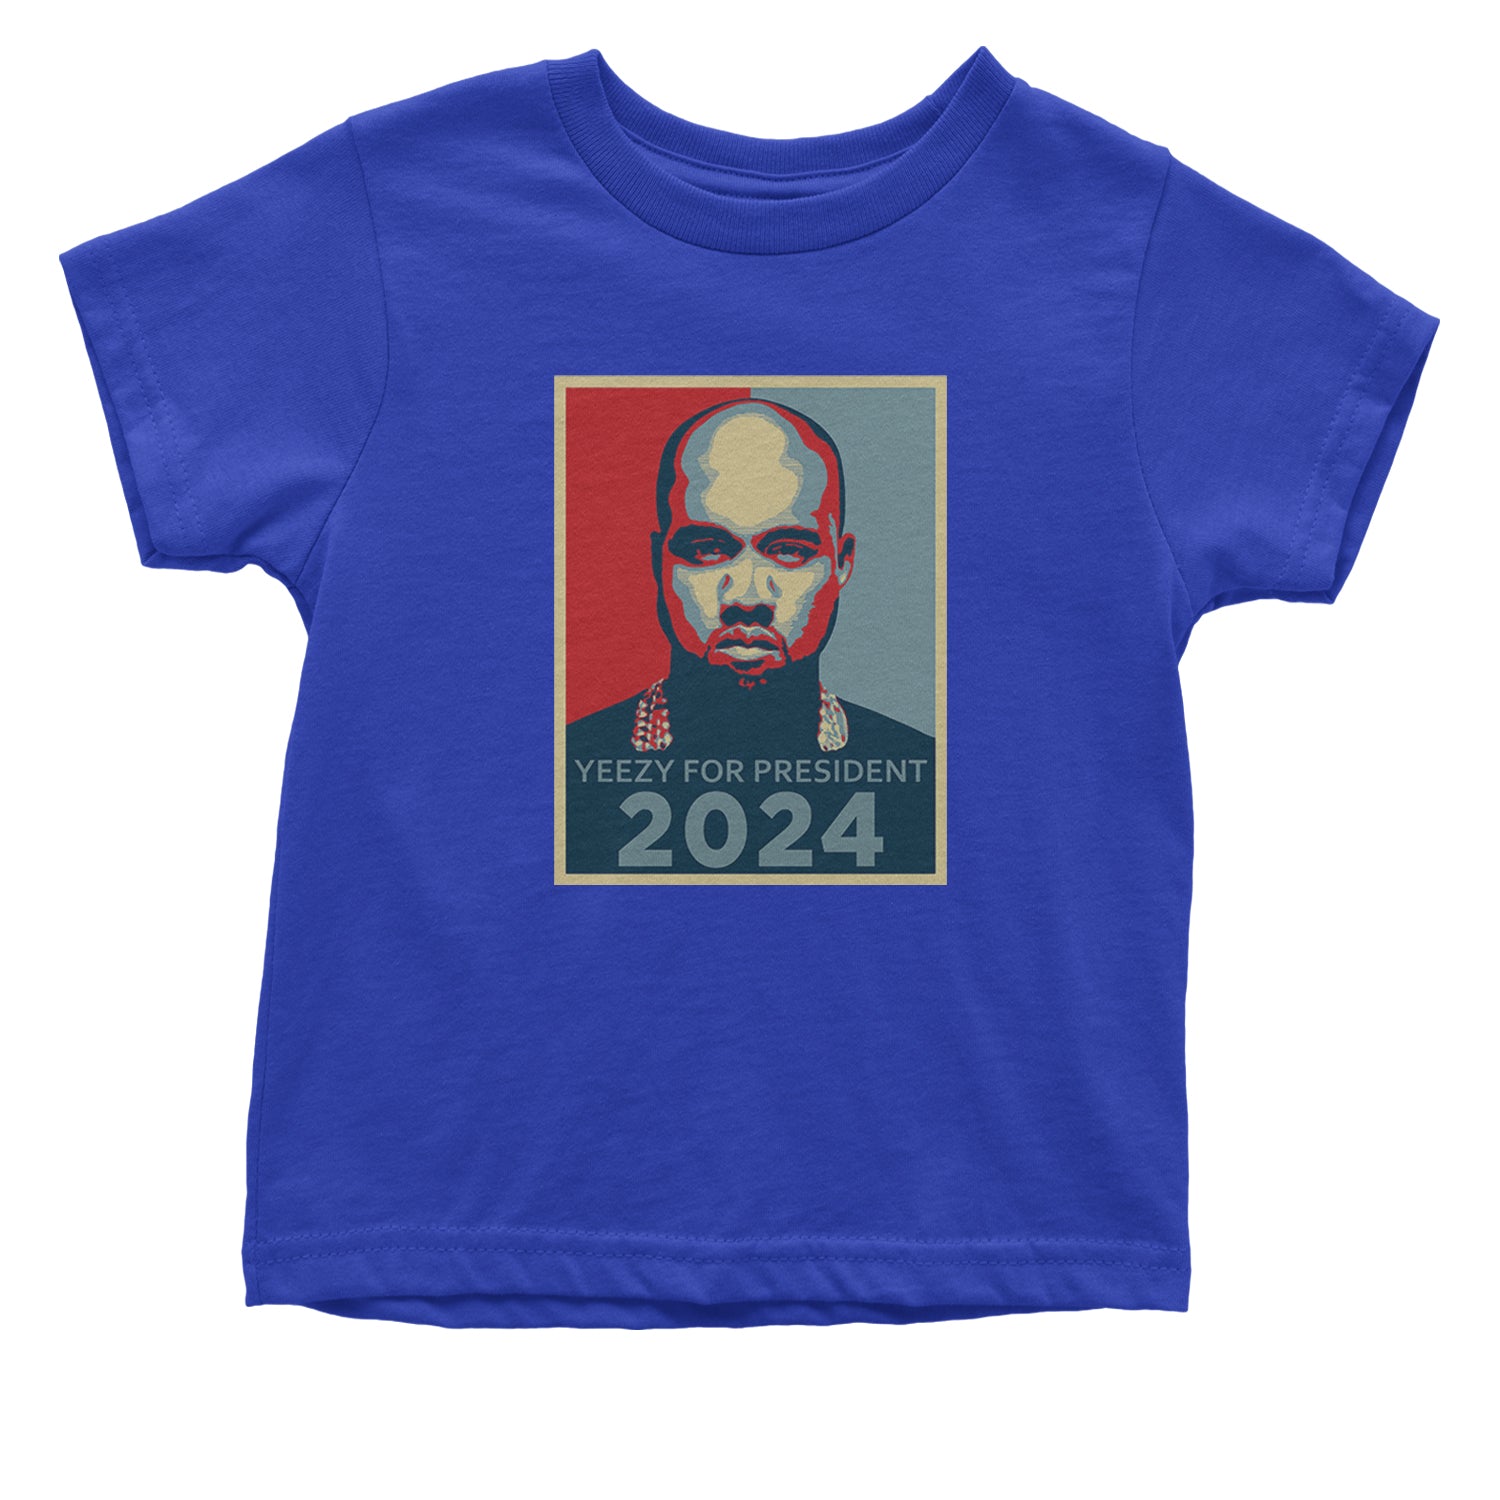 Yeezus For President Vote for Ye Infant One-Piece Romper Bodysuit and Toddler T-shirt Royal Blue